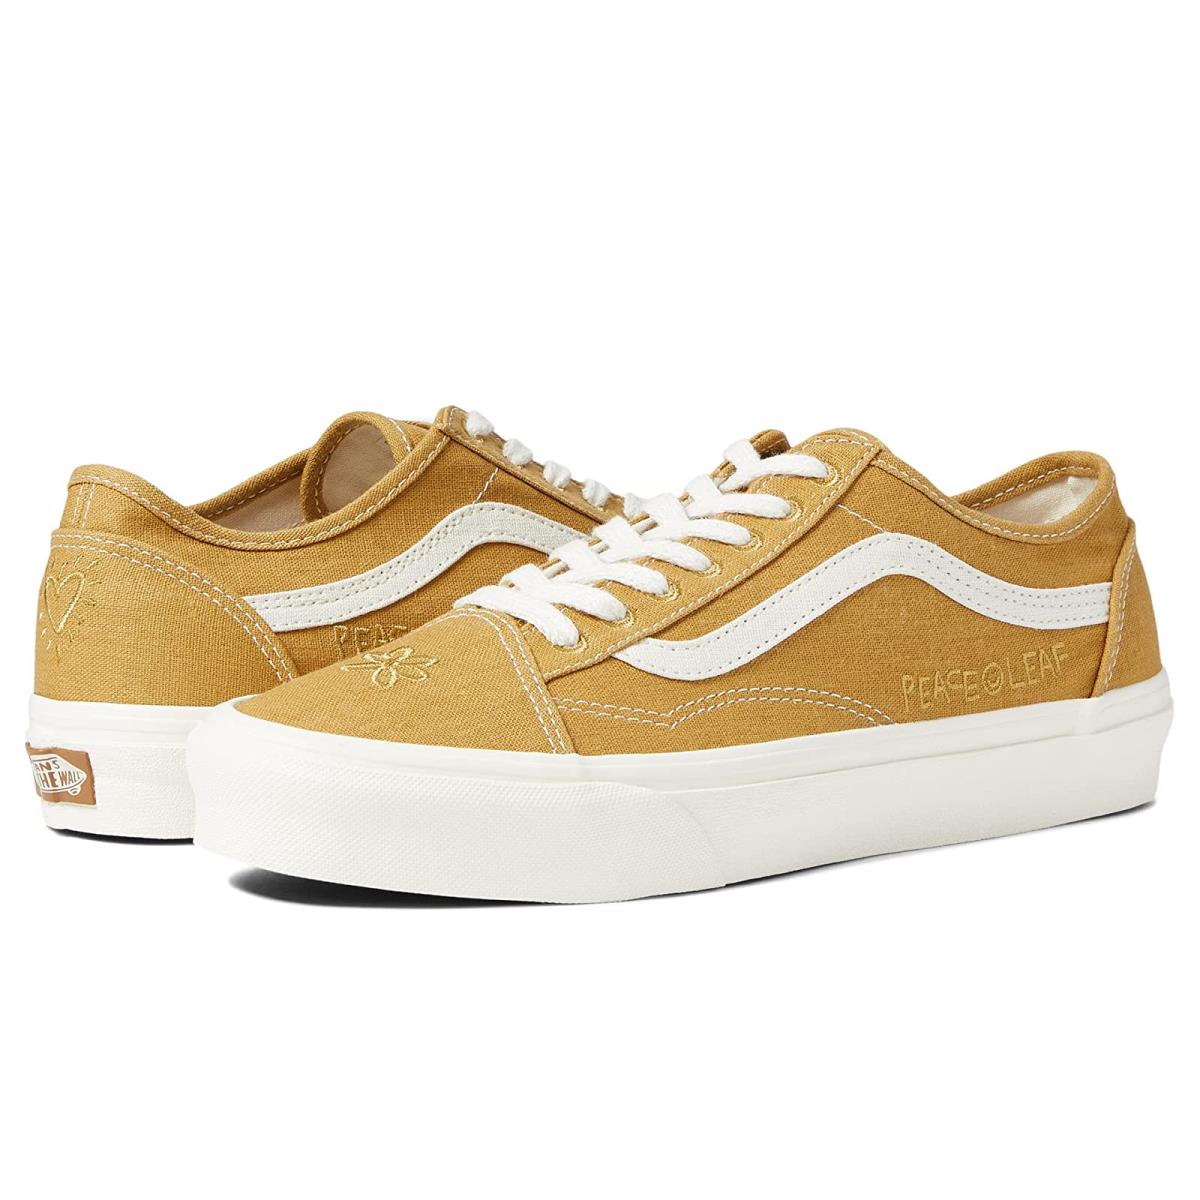 Unisex Sneakers Athletic Shoes Vans Old Skool Tapered (Eco Theory) Mustard Gold/True White